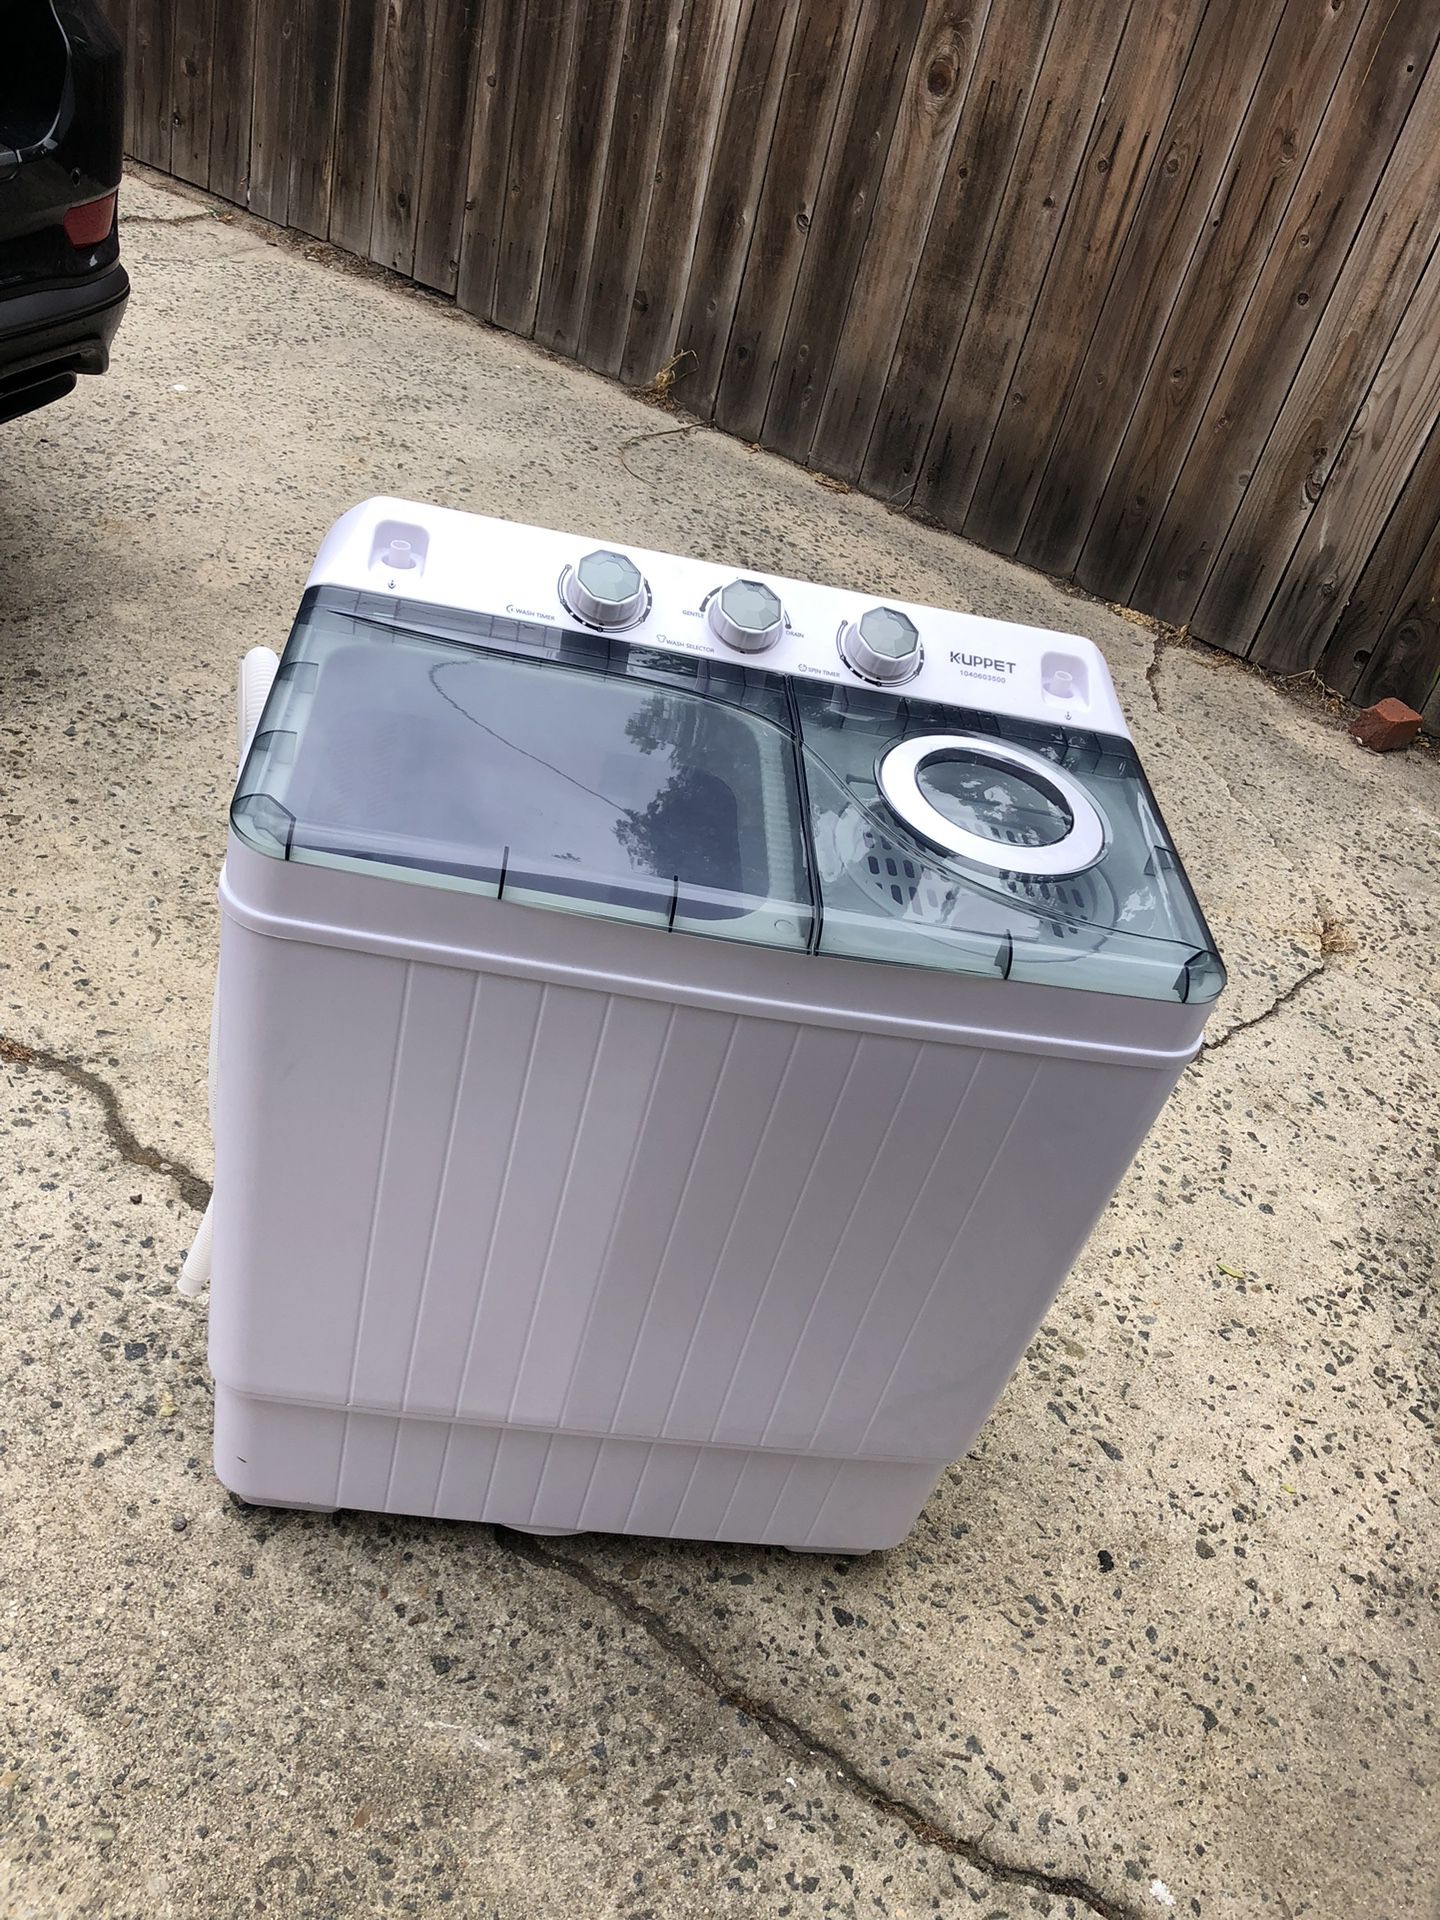 Zeny Portable Washing Machine for Sale in Fort Lauderdale, FL - OfferUp